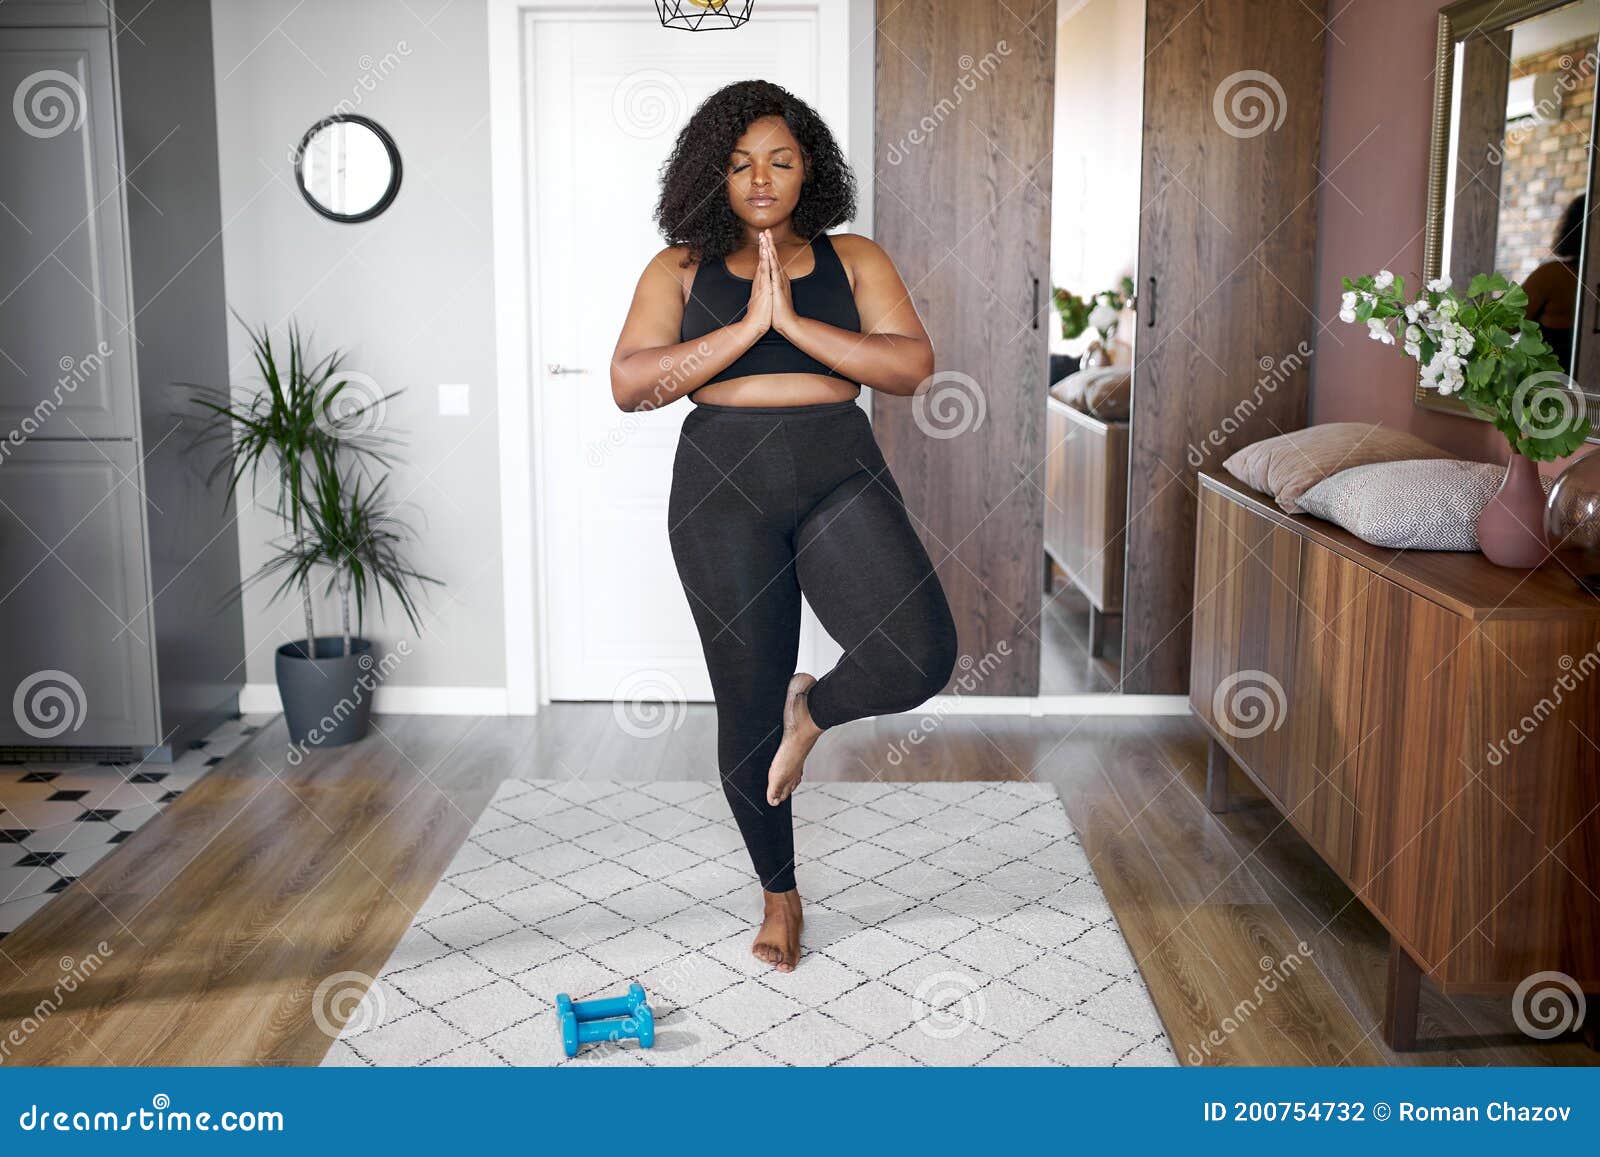 young african woman keep balance, stand on one leg, yoga time at home